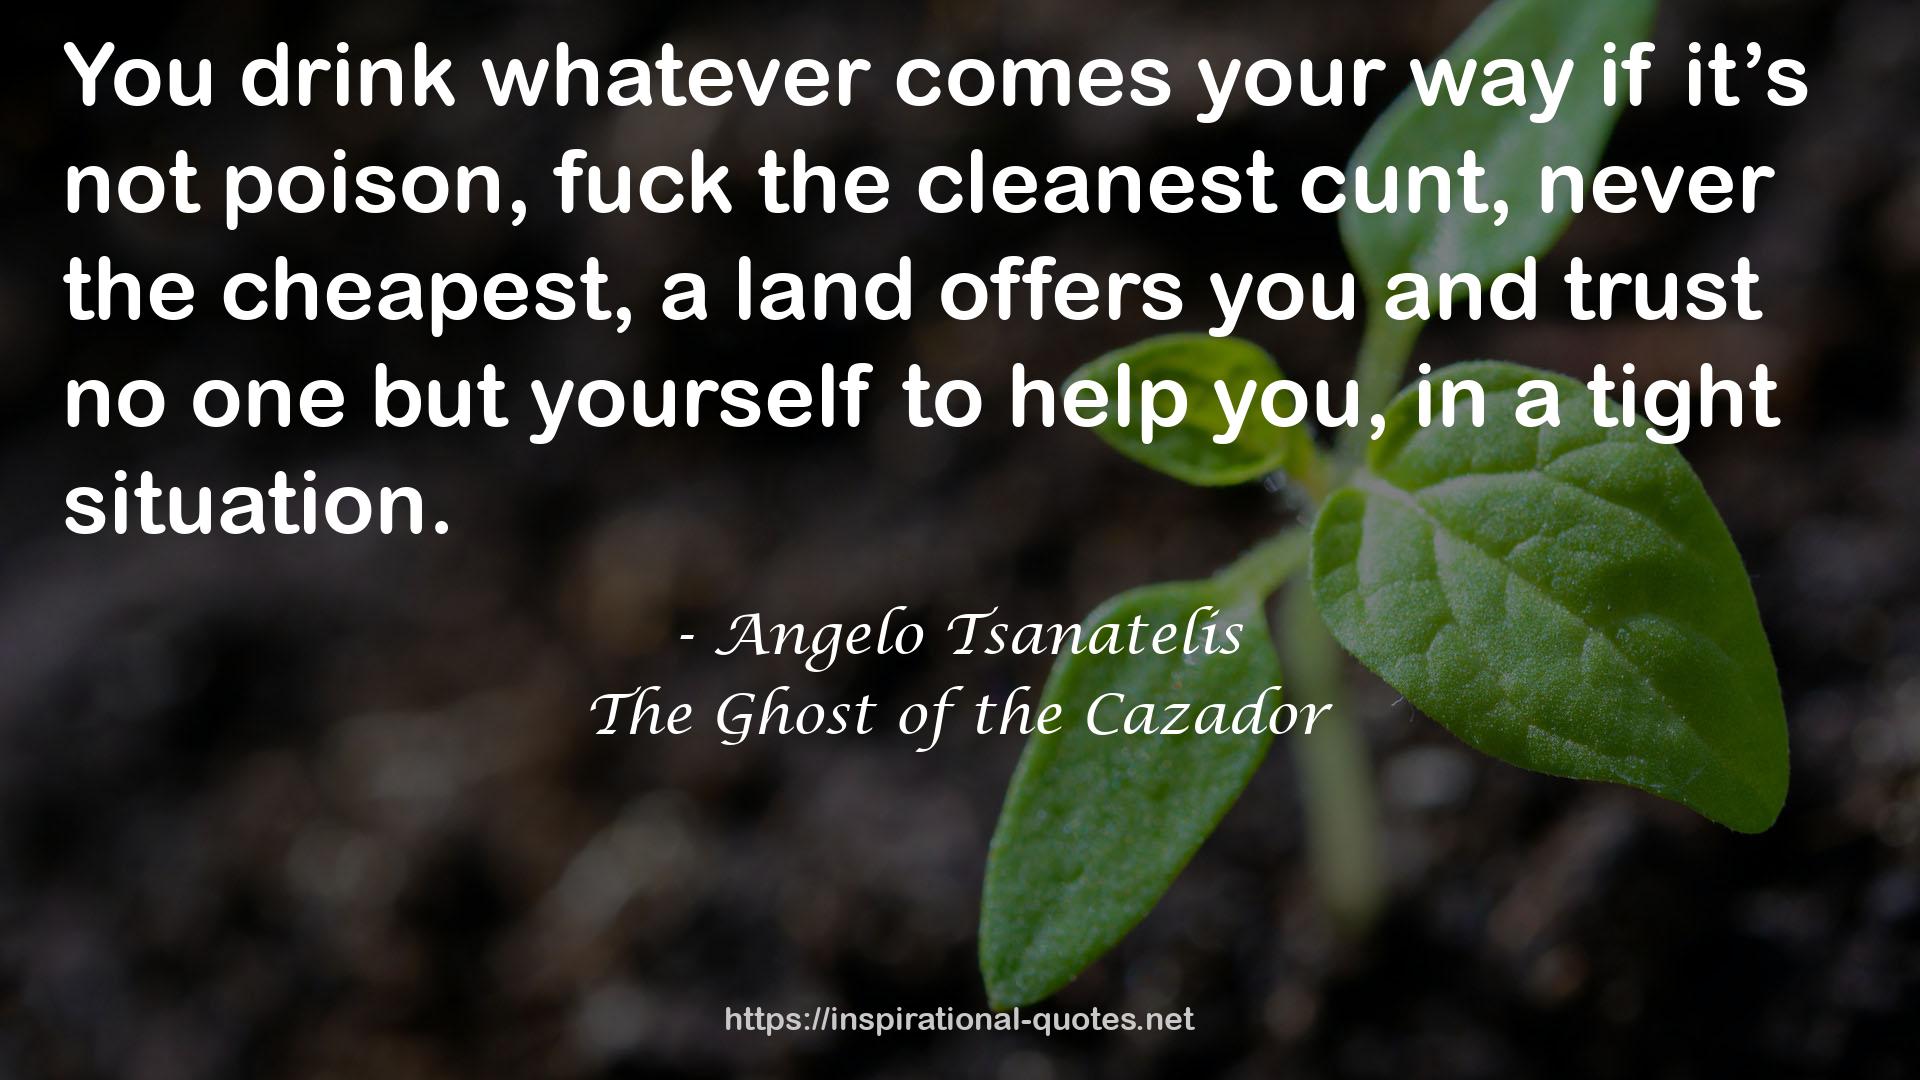 The Ghost of the Cazador QUOTES